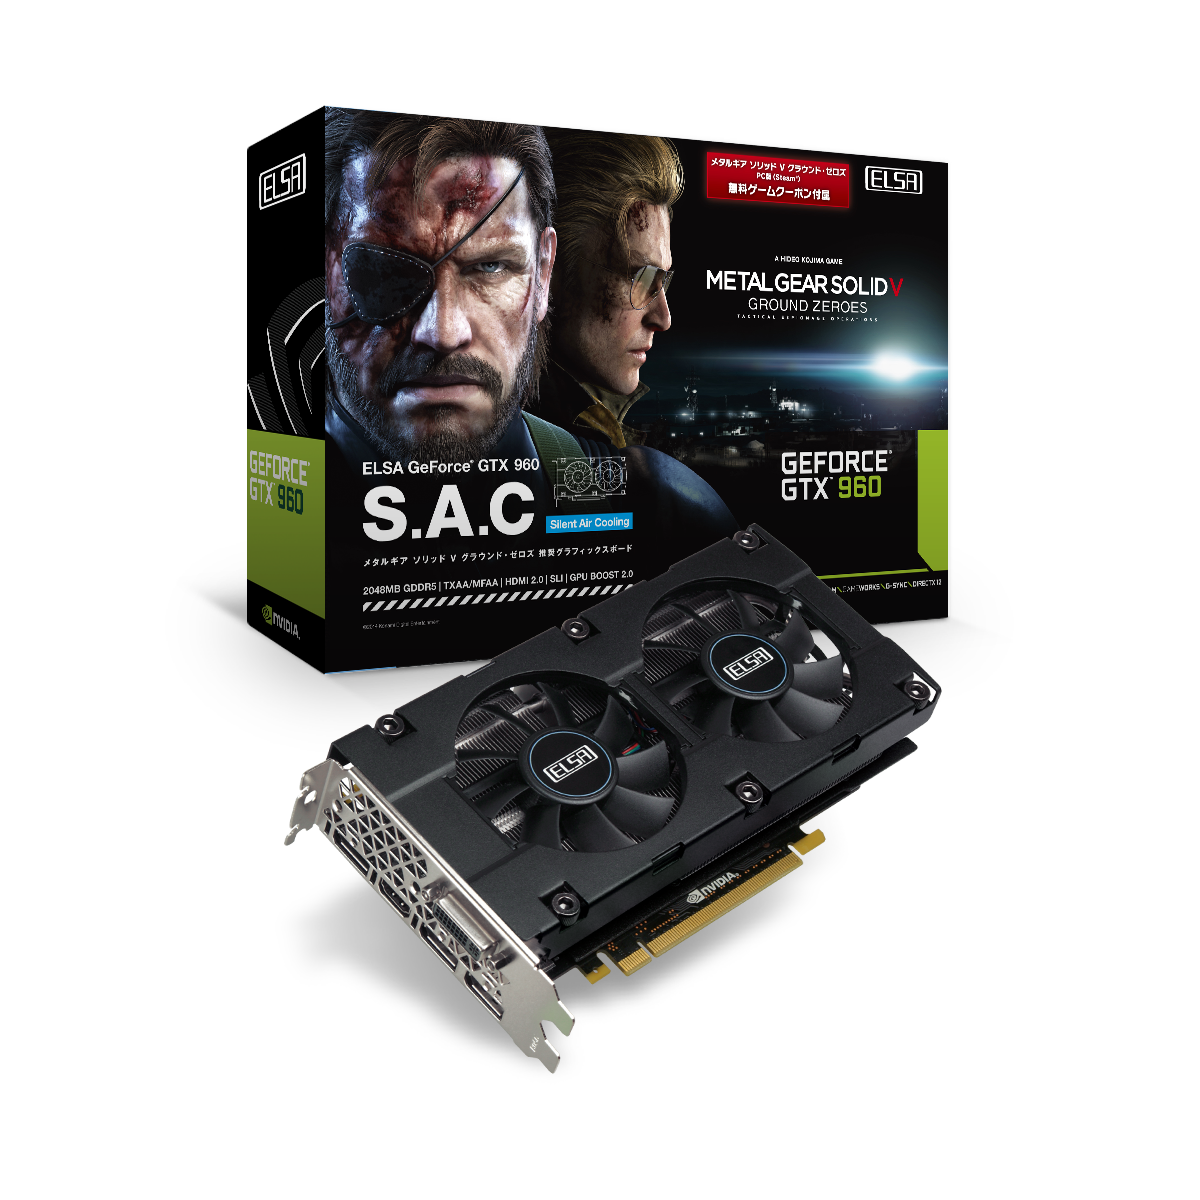 Media asset in full size related to 3dfxzone.it news item entitled as follows: ELSA introduce la card non reference GeForce GTX 960 2GB S.A.C. | Image Name: news22202_ELSA-GeForce-GTX-960-2GB-SAC-MGSV_1.png